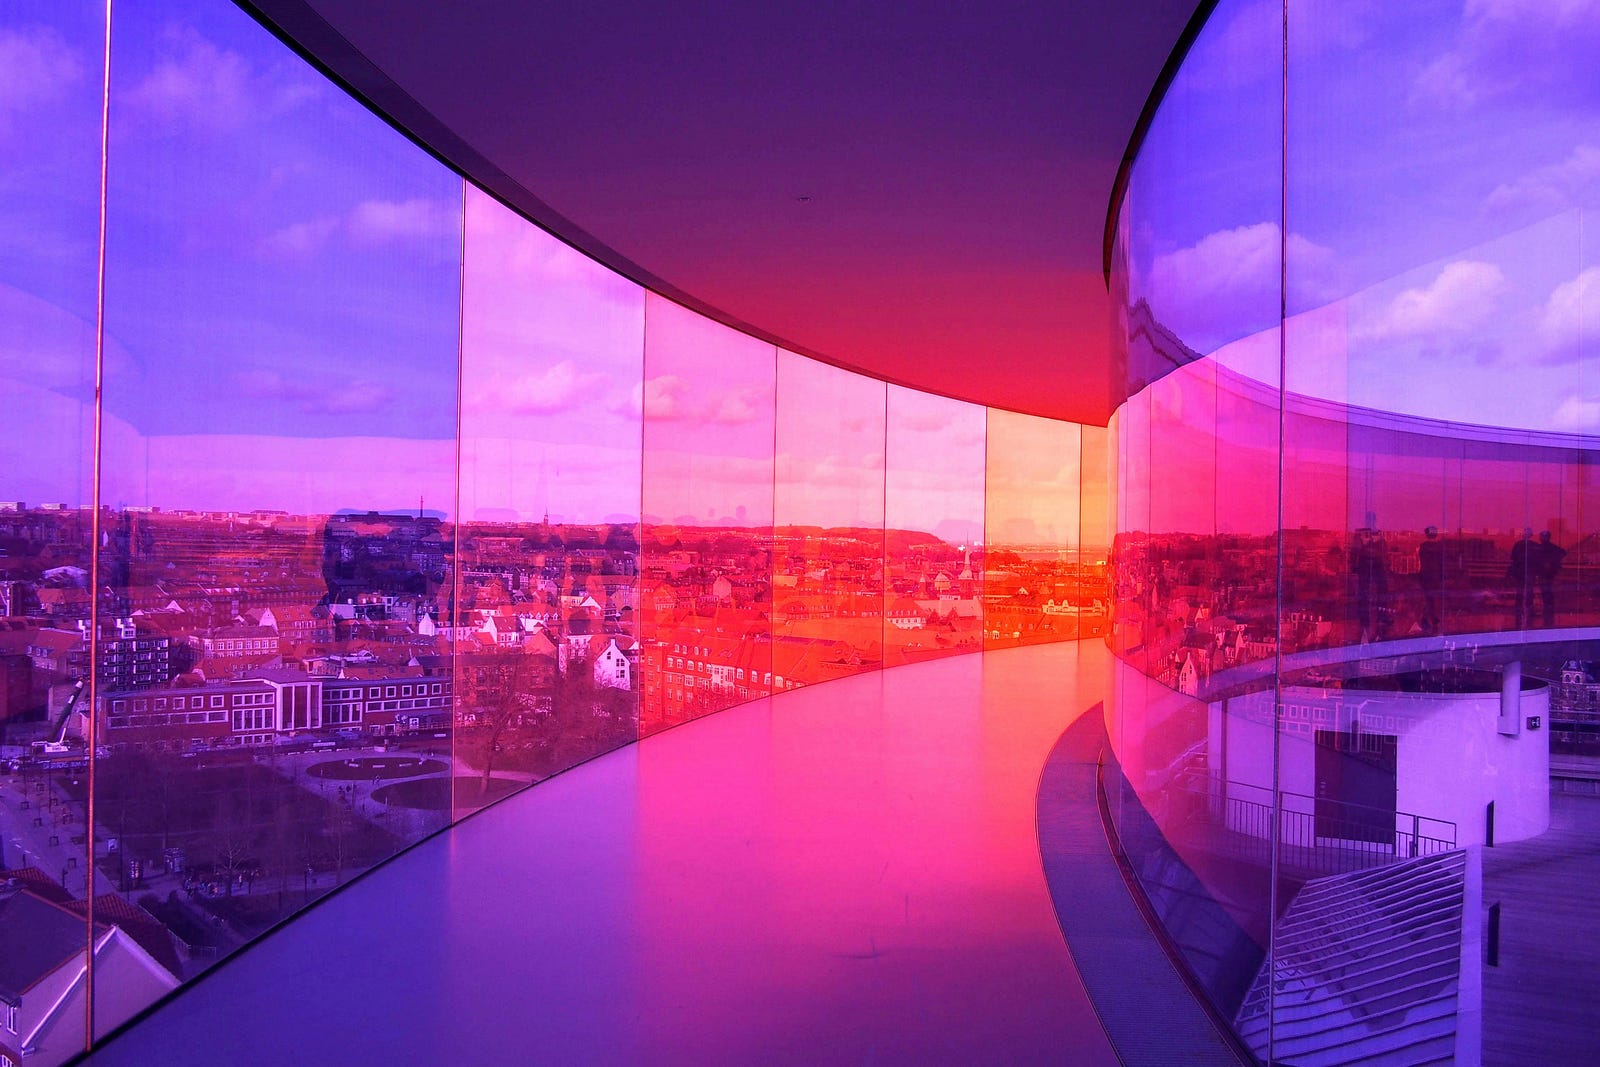 Sunset, as scene from a building in Copenhagen. The windows extend floor to ceiling in this curved structure.